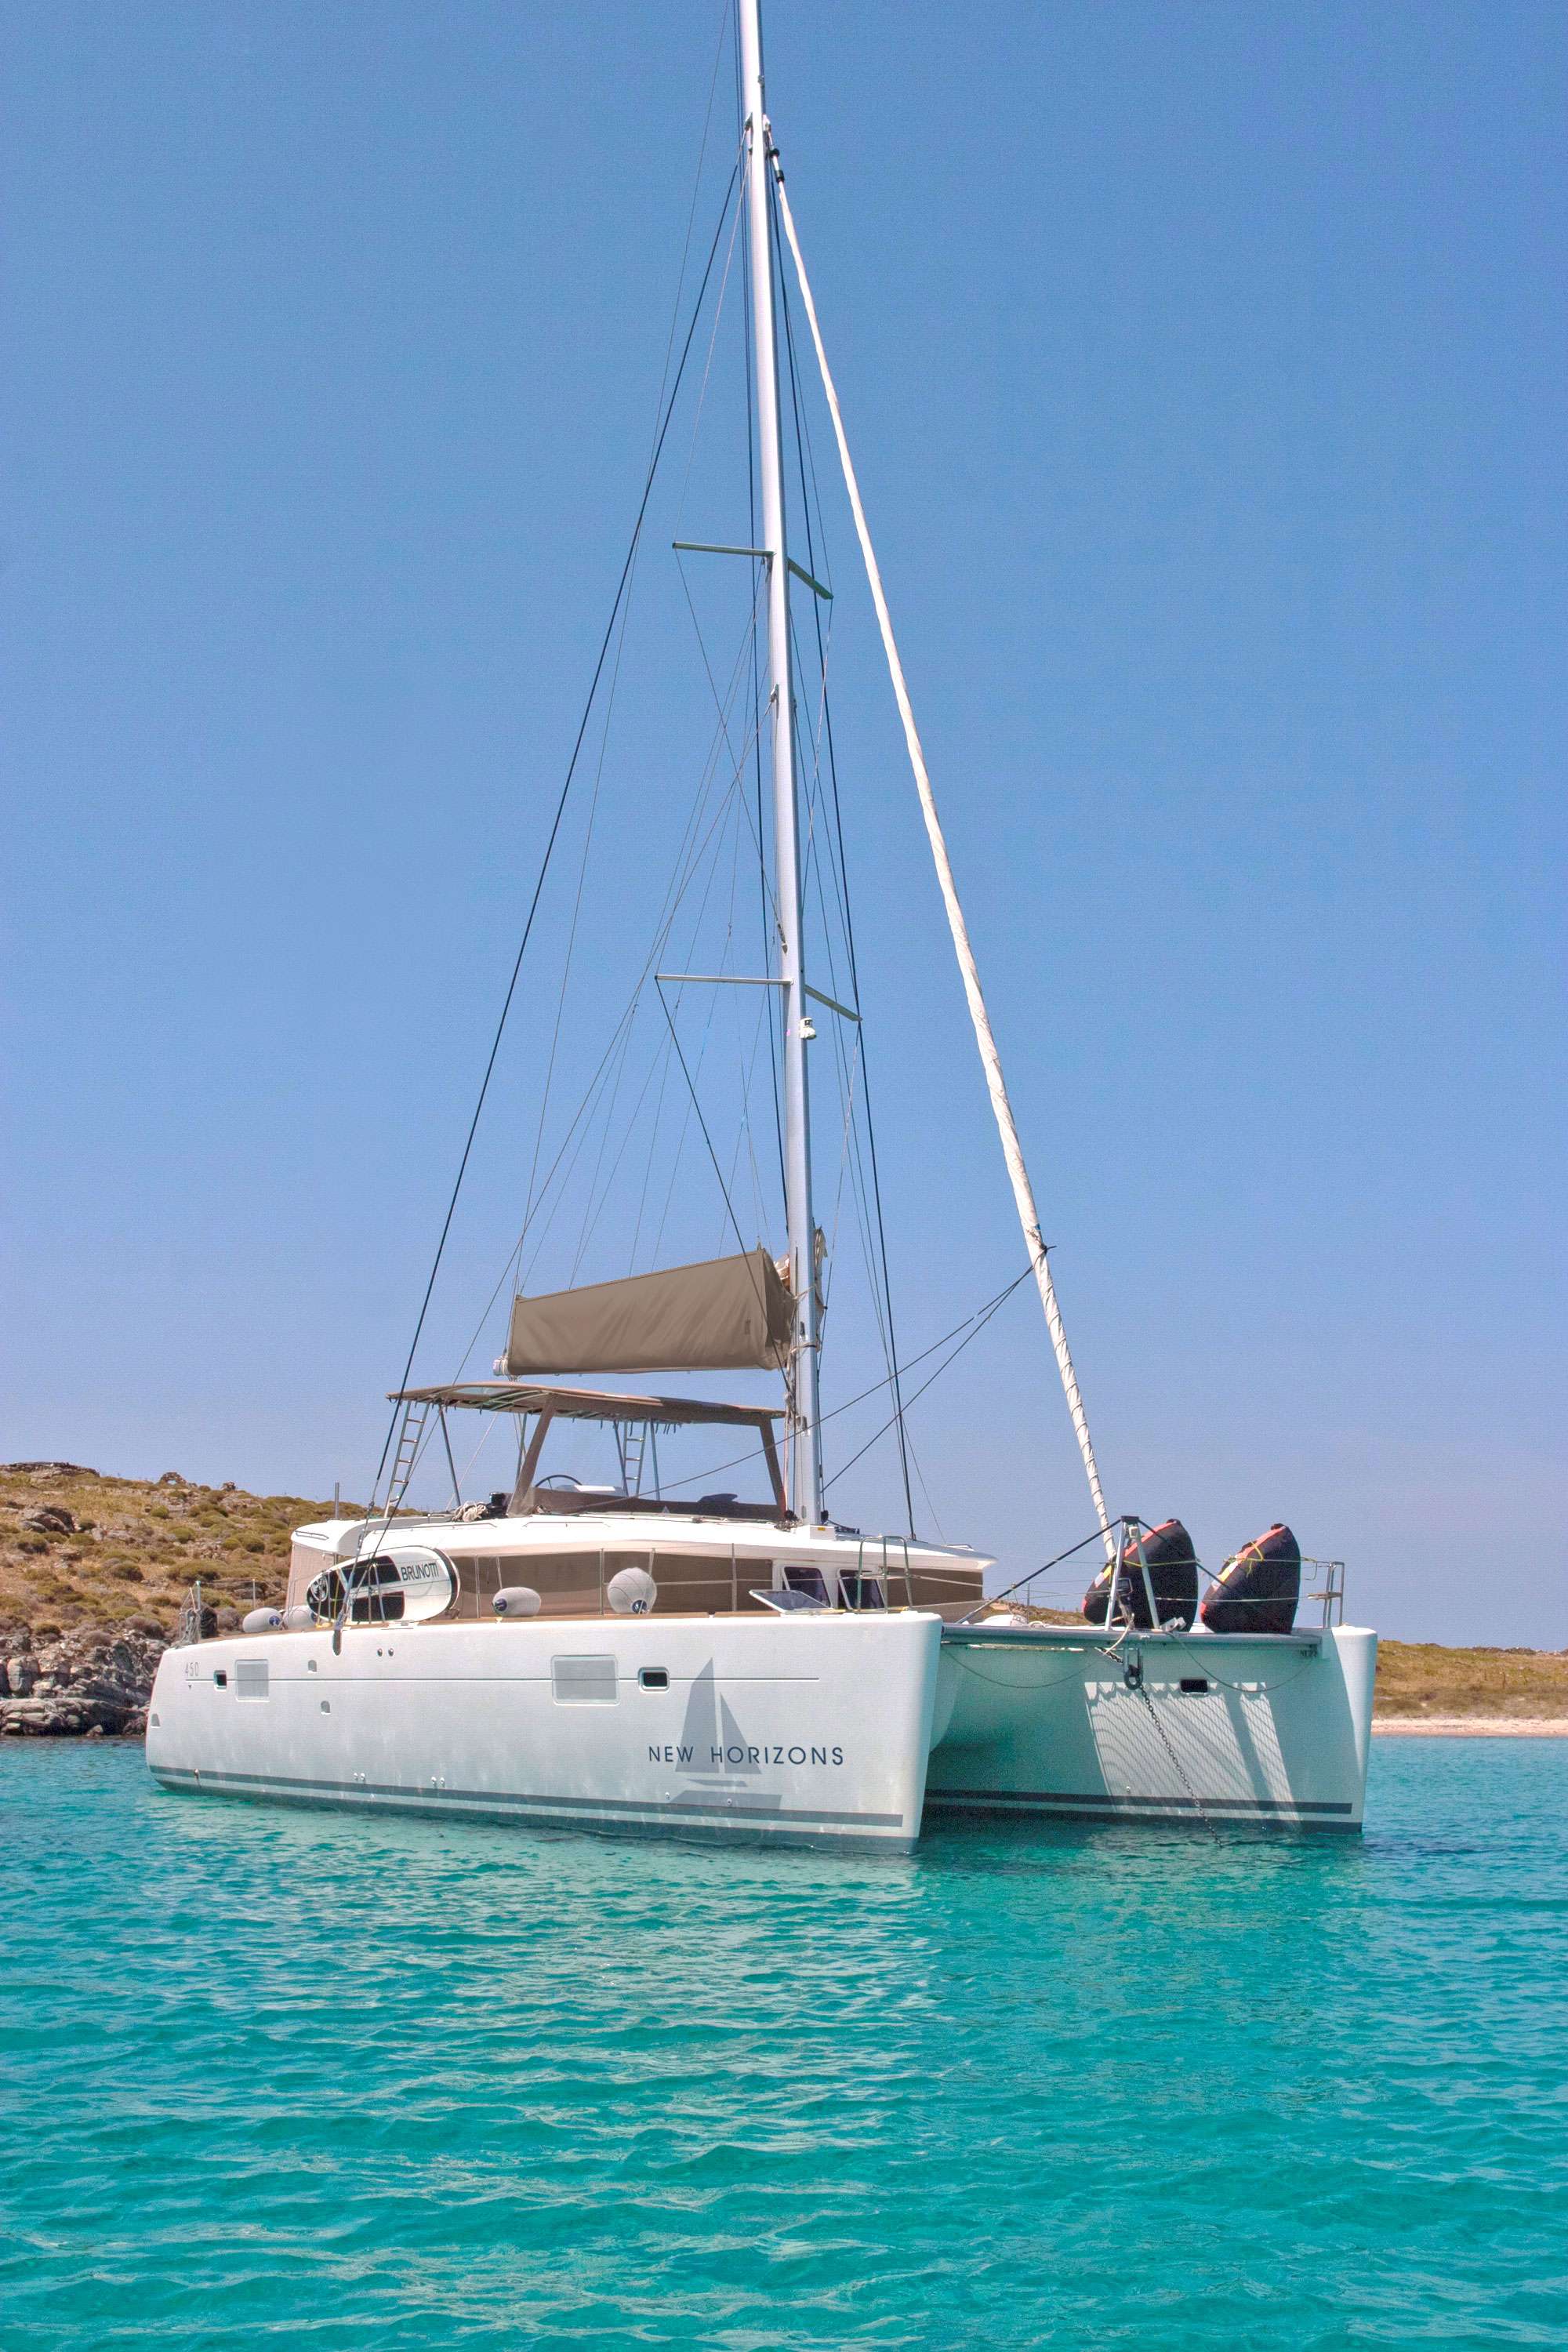 S/Y NEW HORIZONS
LAGOON 450
NOW IN BLUE EXTERIOR (2019) 
BUILT 2014 / REFIT 2017
8 PAX / 4  DOUBLE CABINS (2 CABINS CAN CONVERT TO TWIN BEDS)
2 CREW
BASED IN ATHENS, GREECE







